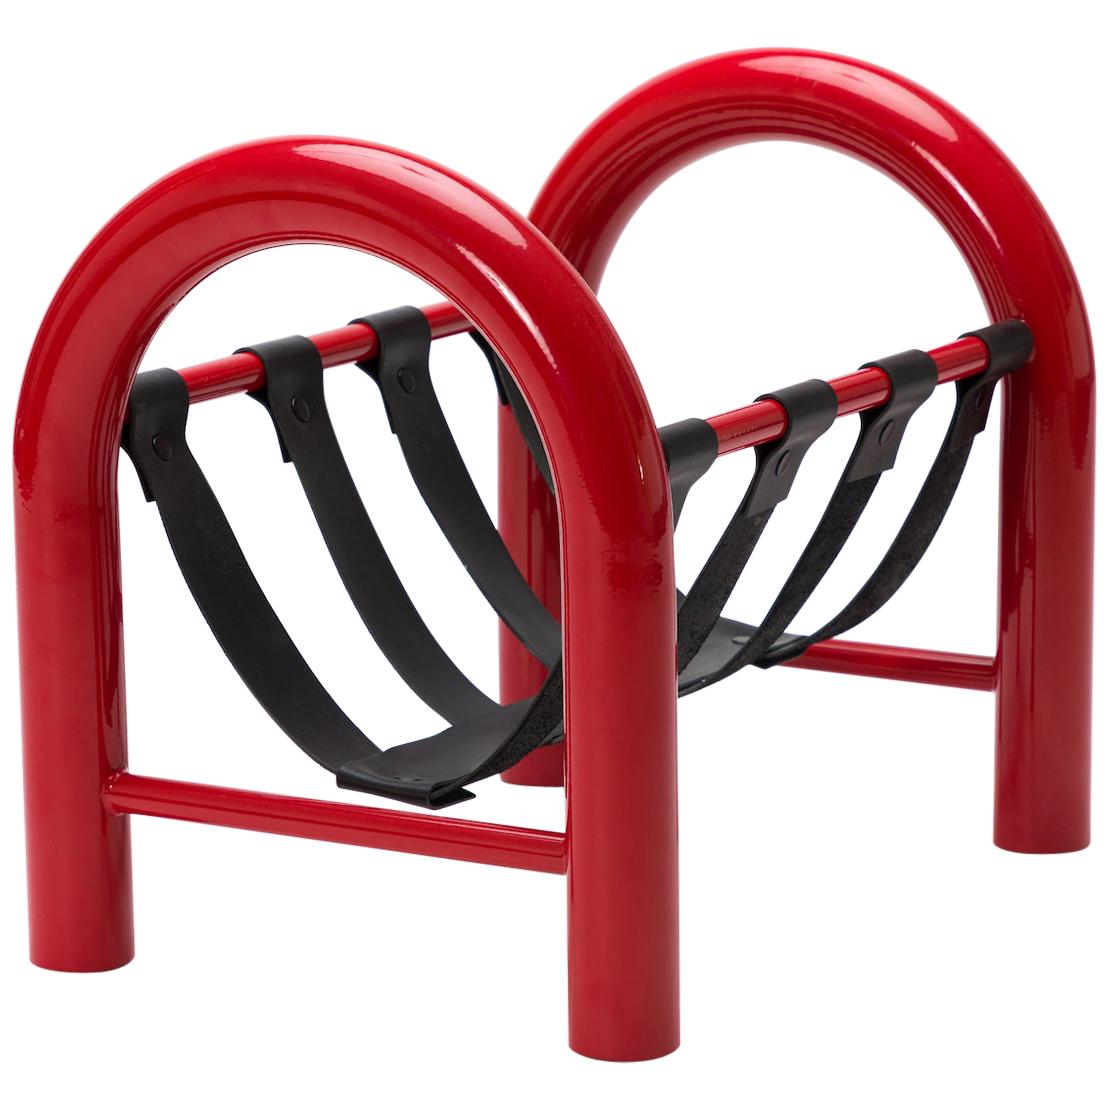 Limited Edition Tubular Magazine Rack by Another Human, Red and Black